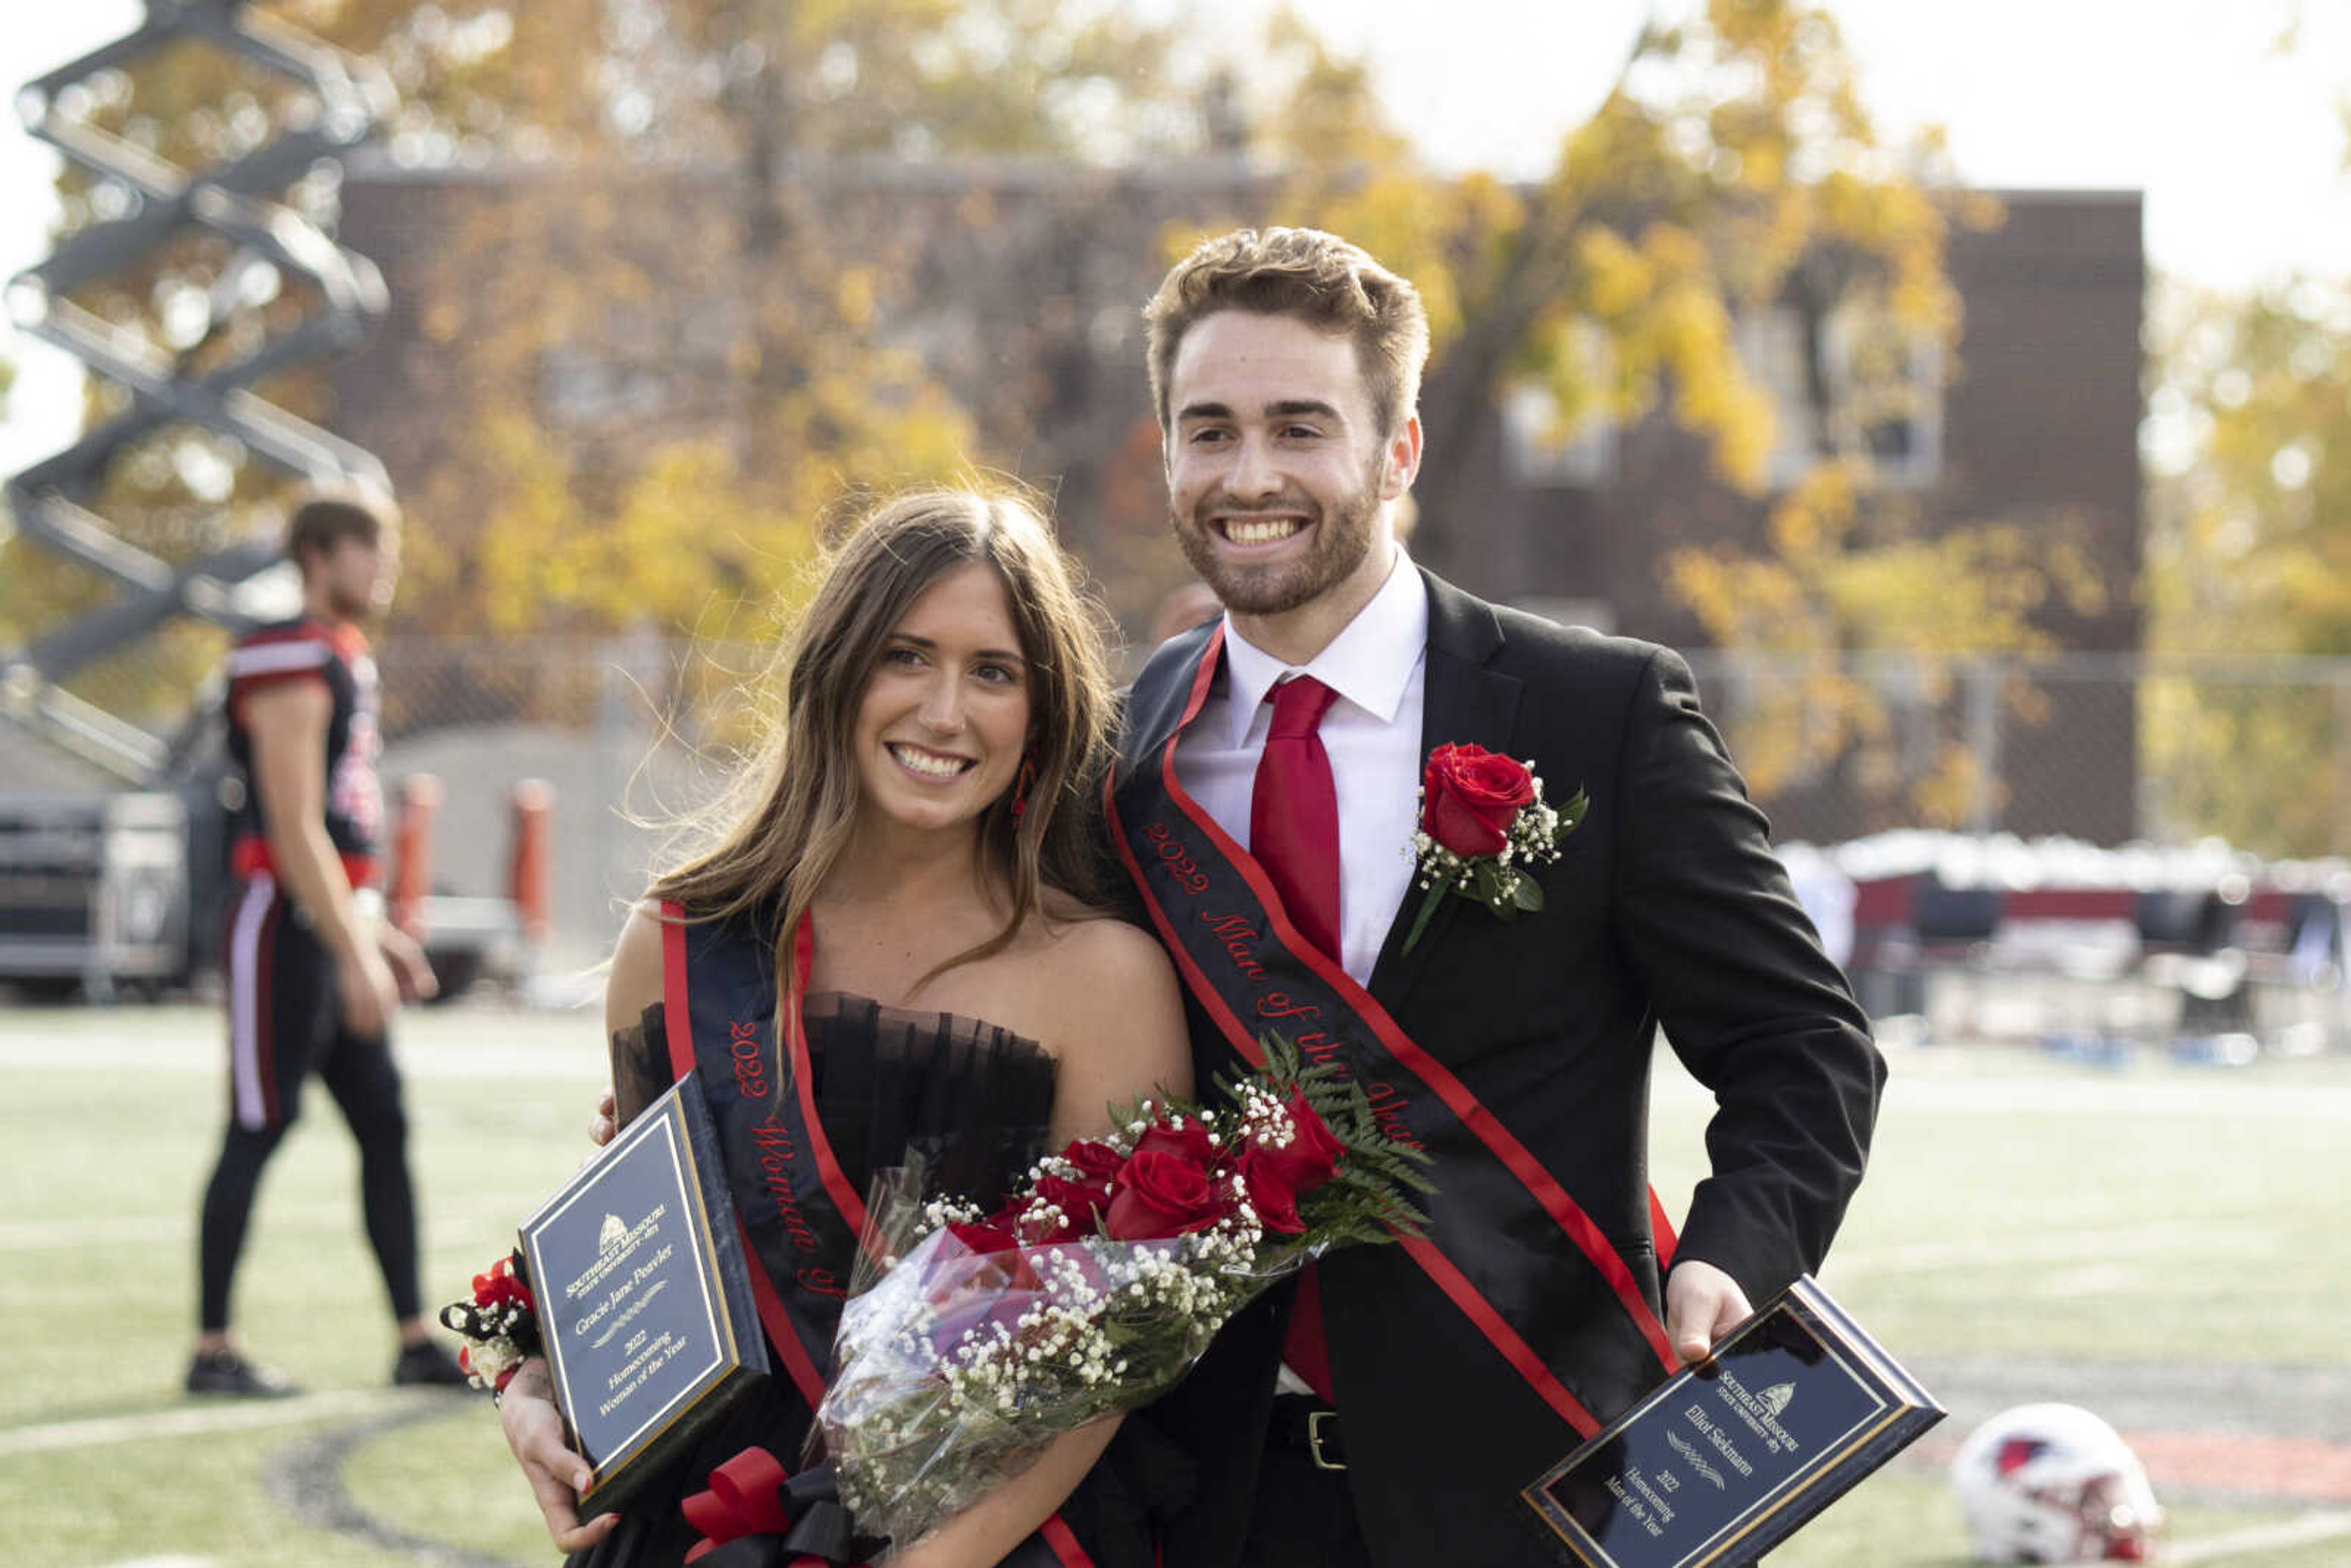 (Left)Homecoming Woman of the Year Gracie Jane Peavler and Man of the Year Elliot Siekmann stand in the middle of Houck Field while they have their pictures taken on Oct. 29. They were handed roses and plaques from University President Carlos Vargas for their big moment at halftime in the Redhawk's Homecoming football game.